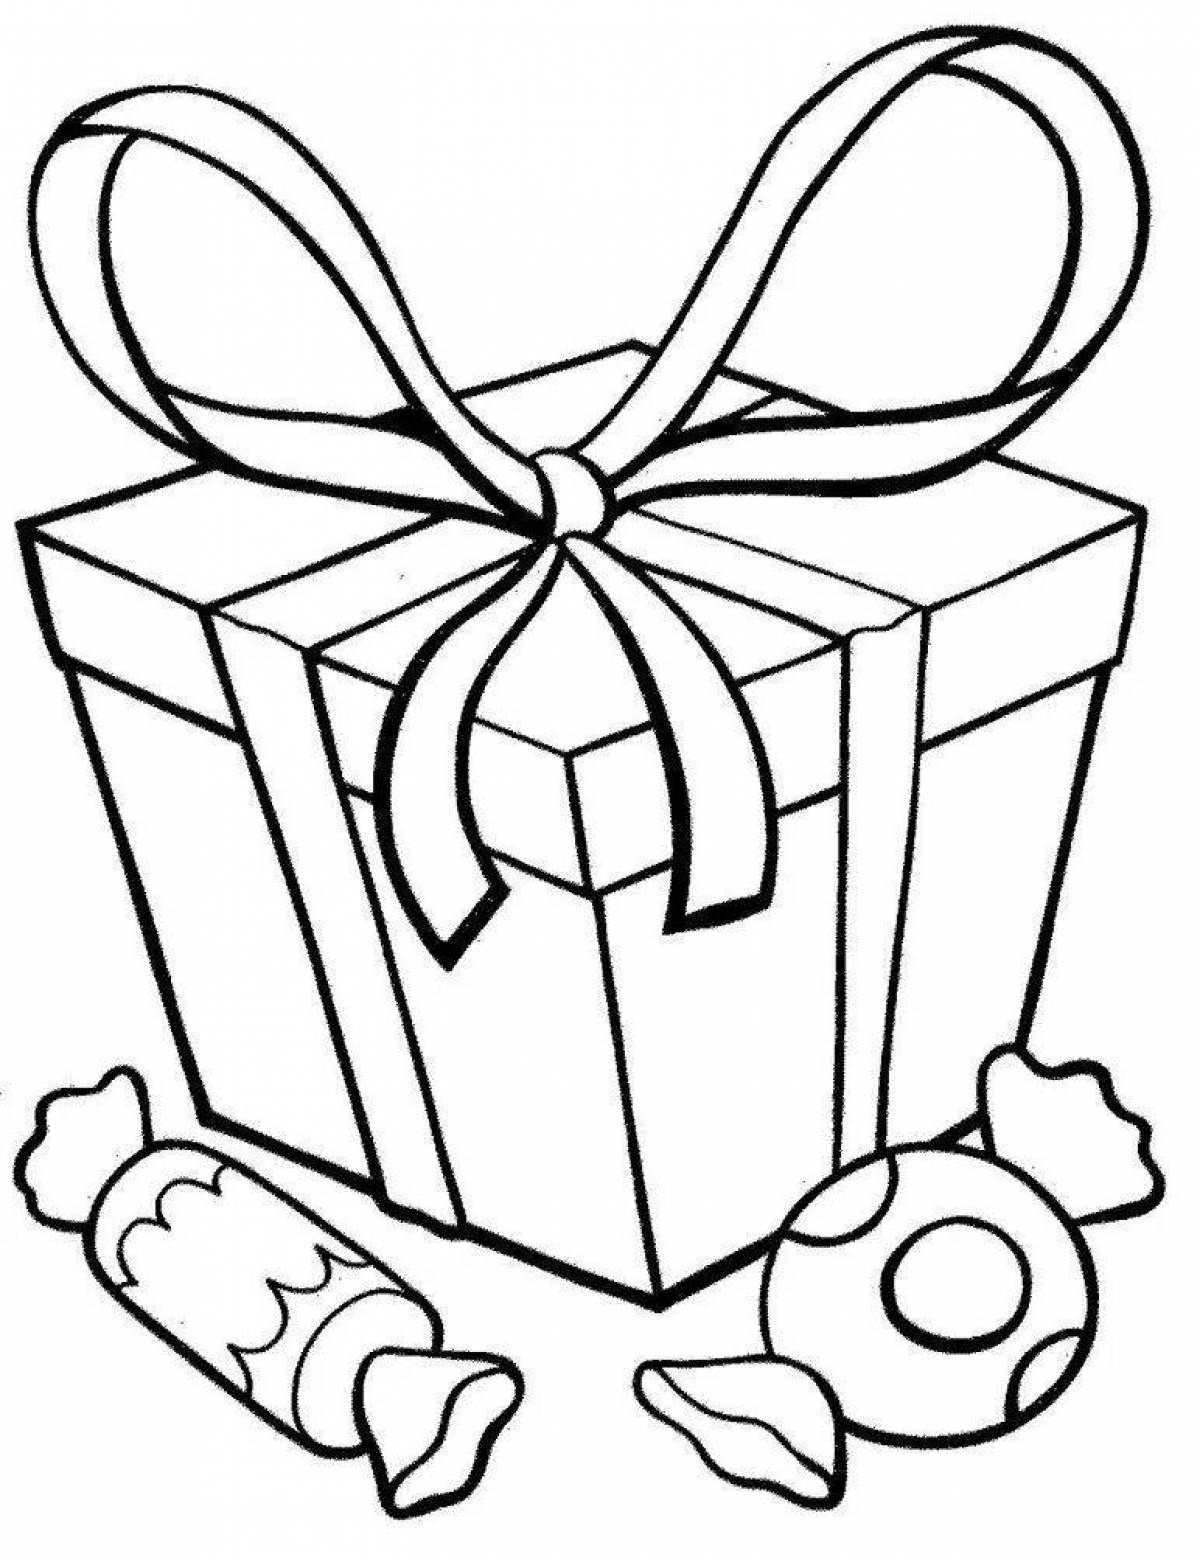 Fancy coloring gift box